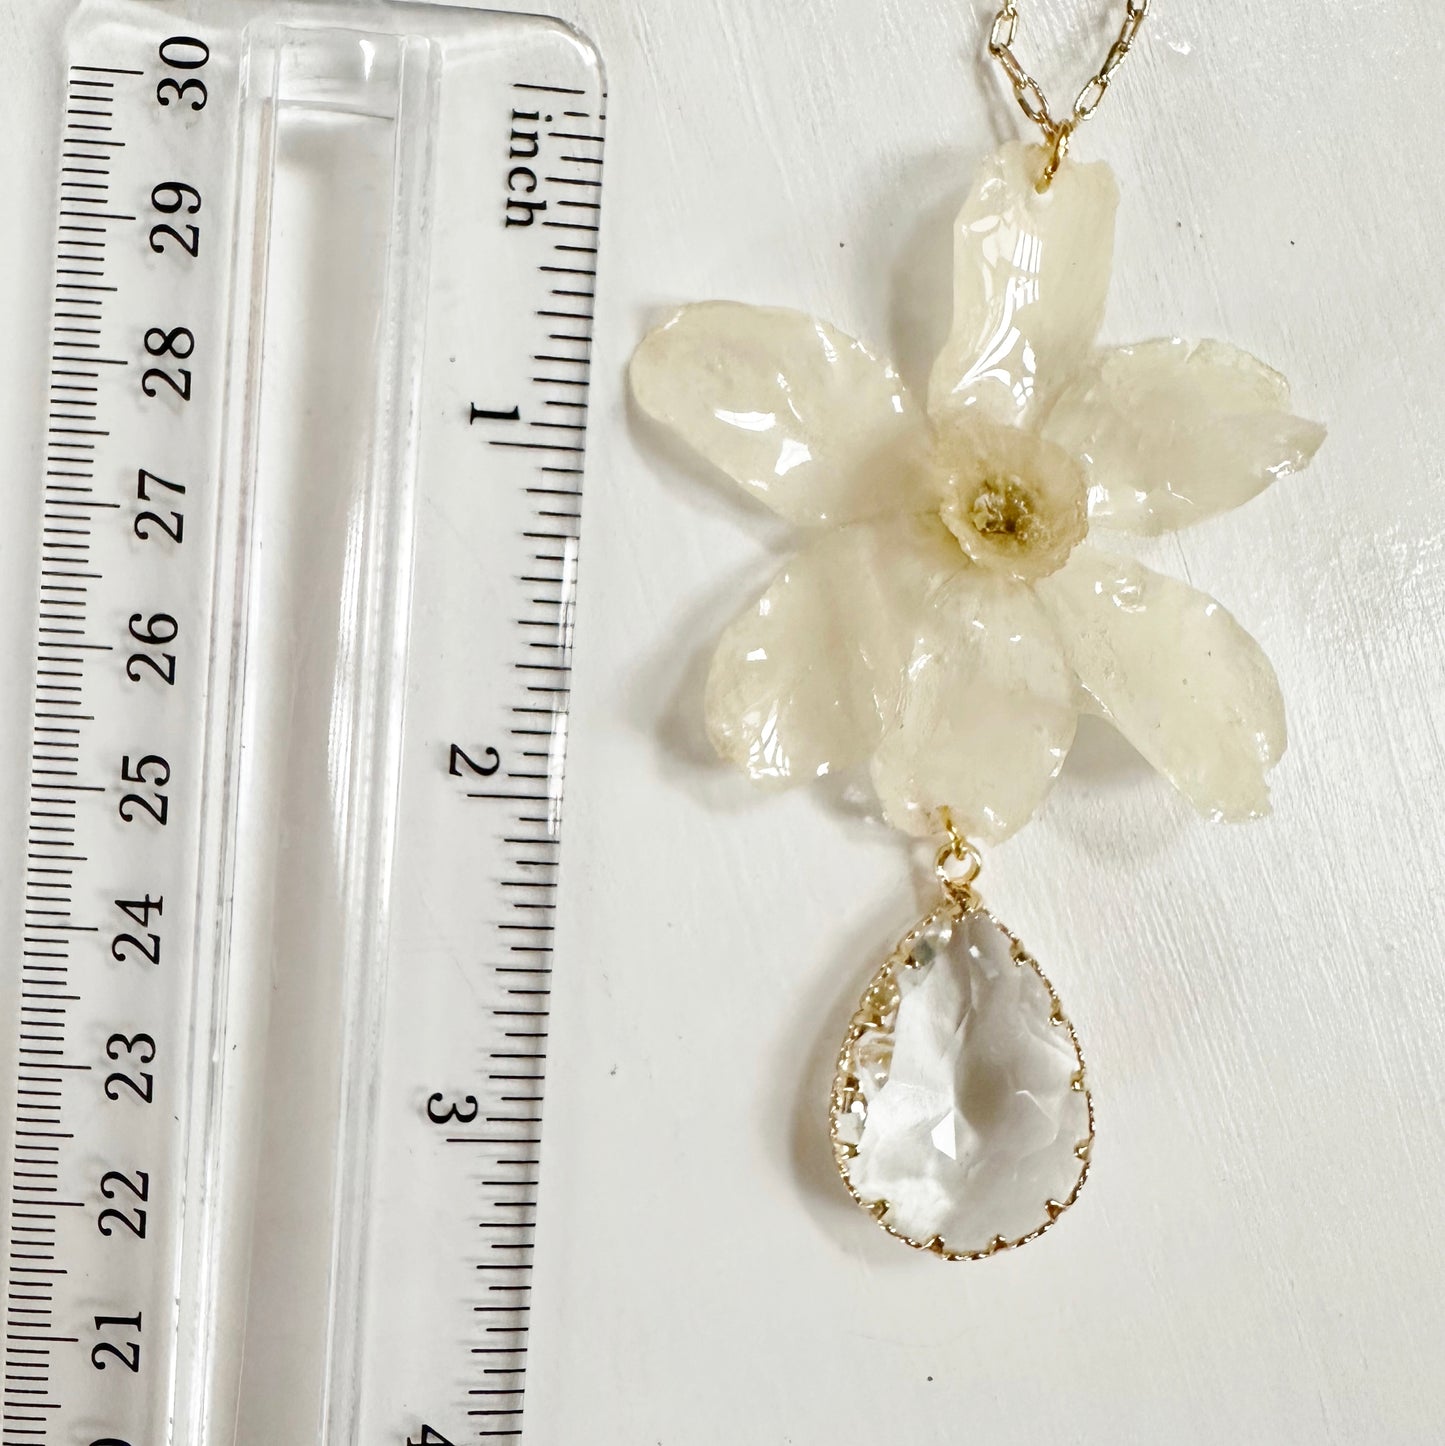 Narcissus Necklace with Crystal Drop